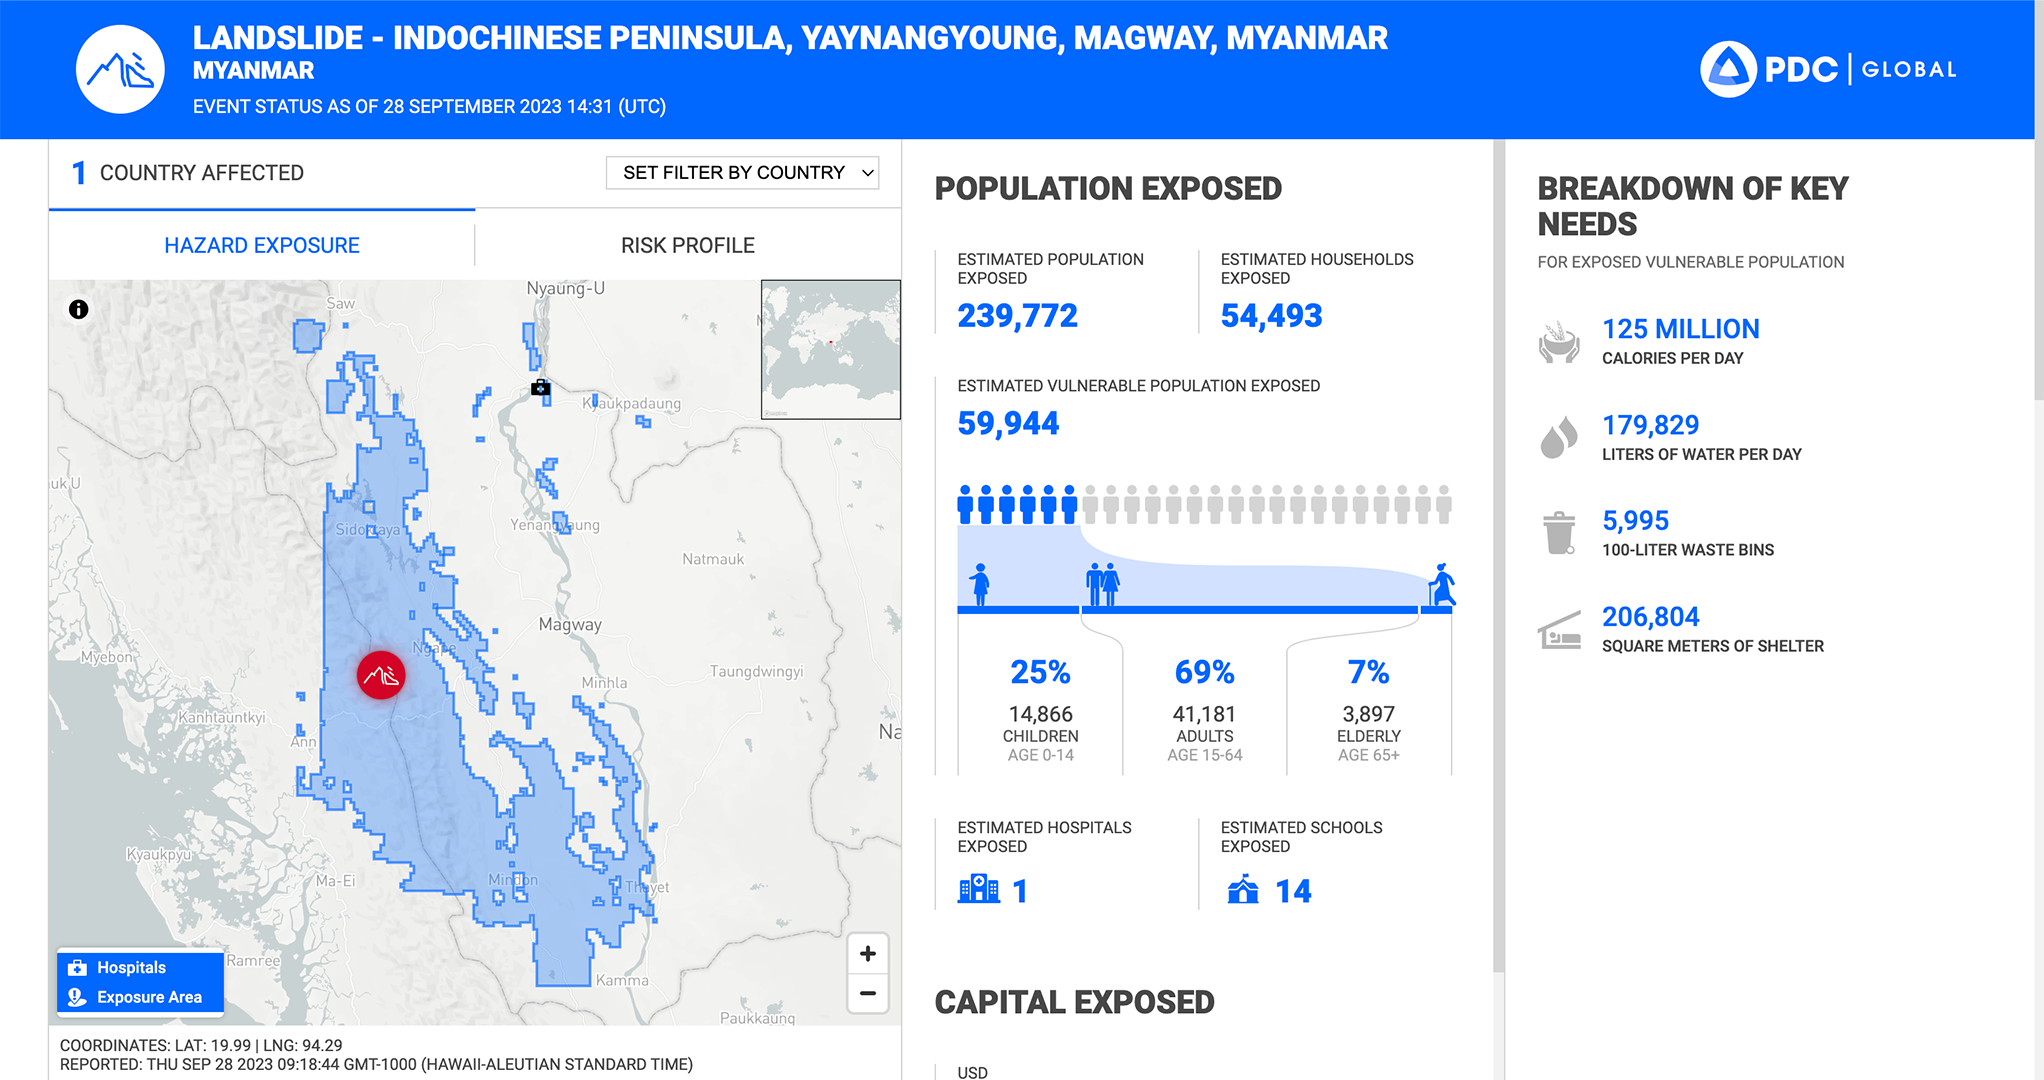 A screenshot from PDC DisasterAWARE showing a disaster exposure report for the Indochinese Peninsula. A map of the region is on the left showing the area affected by increased landslide risk. On the right are statistics on the population exposed, critical infrastructure, and breakdown of key needs.  